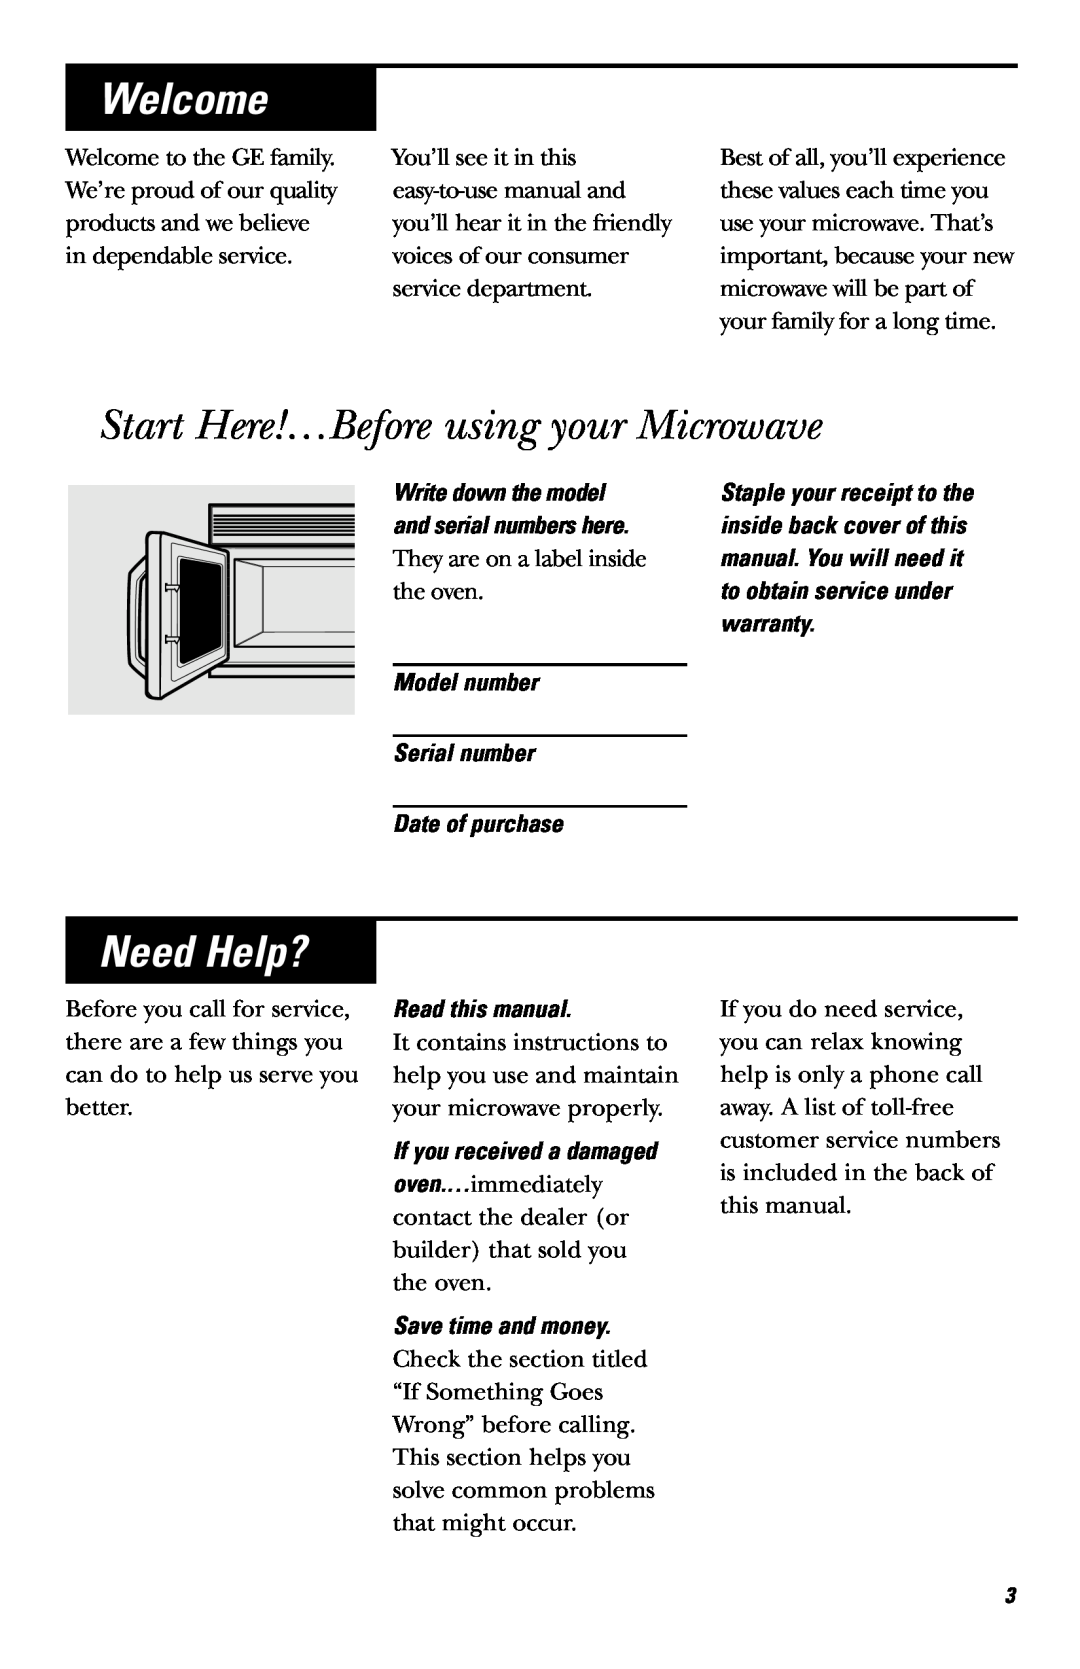 GE JVM142 Welcome, Start Here!…Before using your Microwave, Need Help?, Write down the model and serial numbers here 